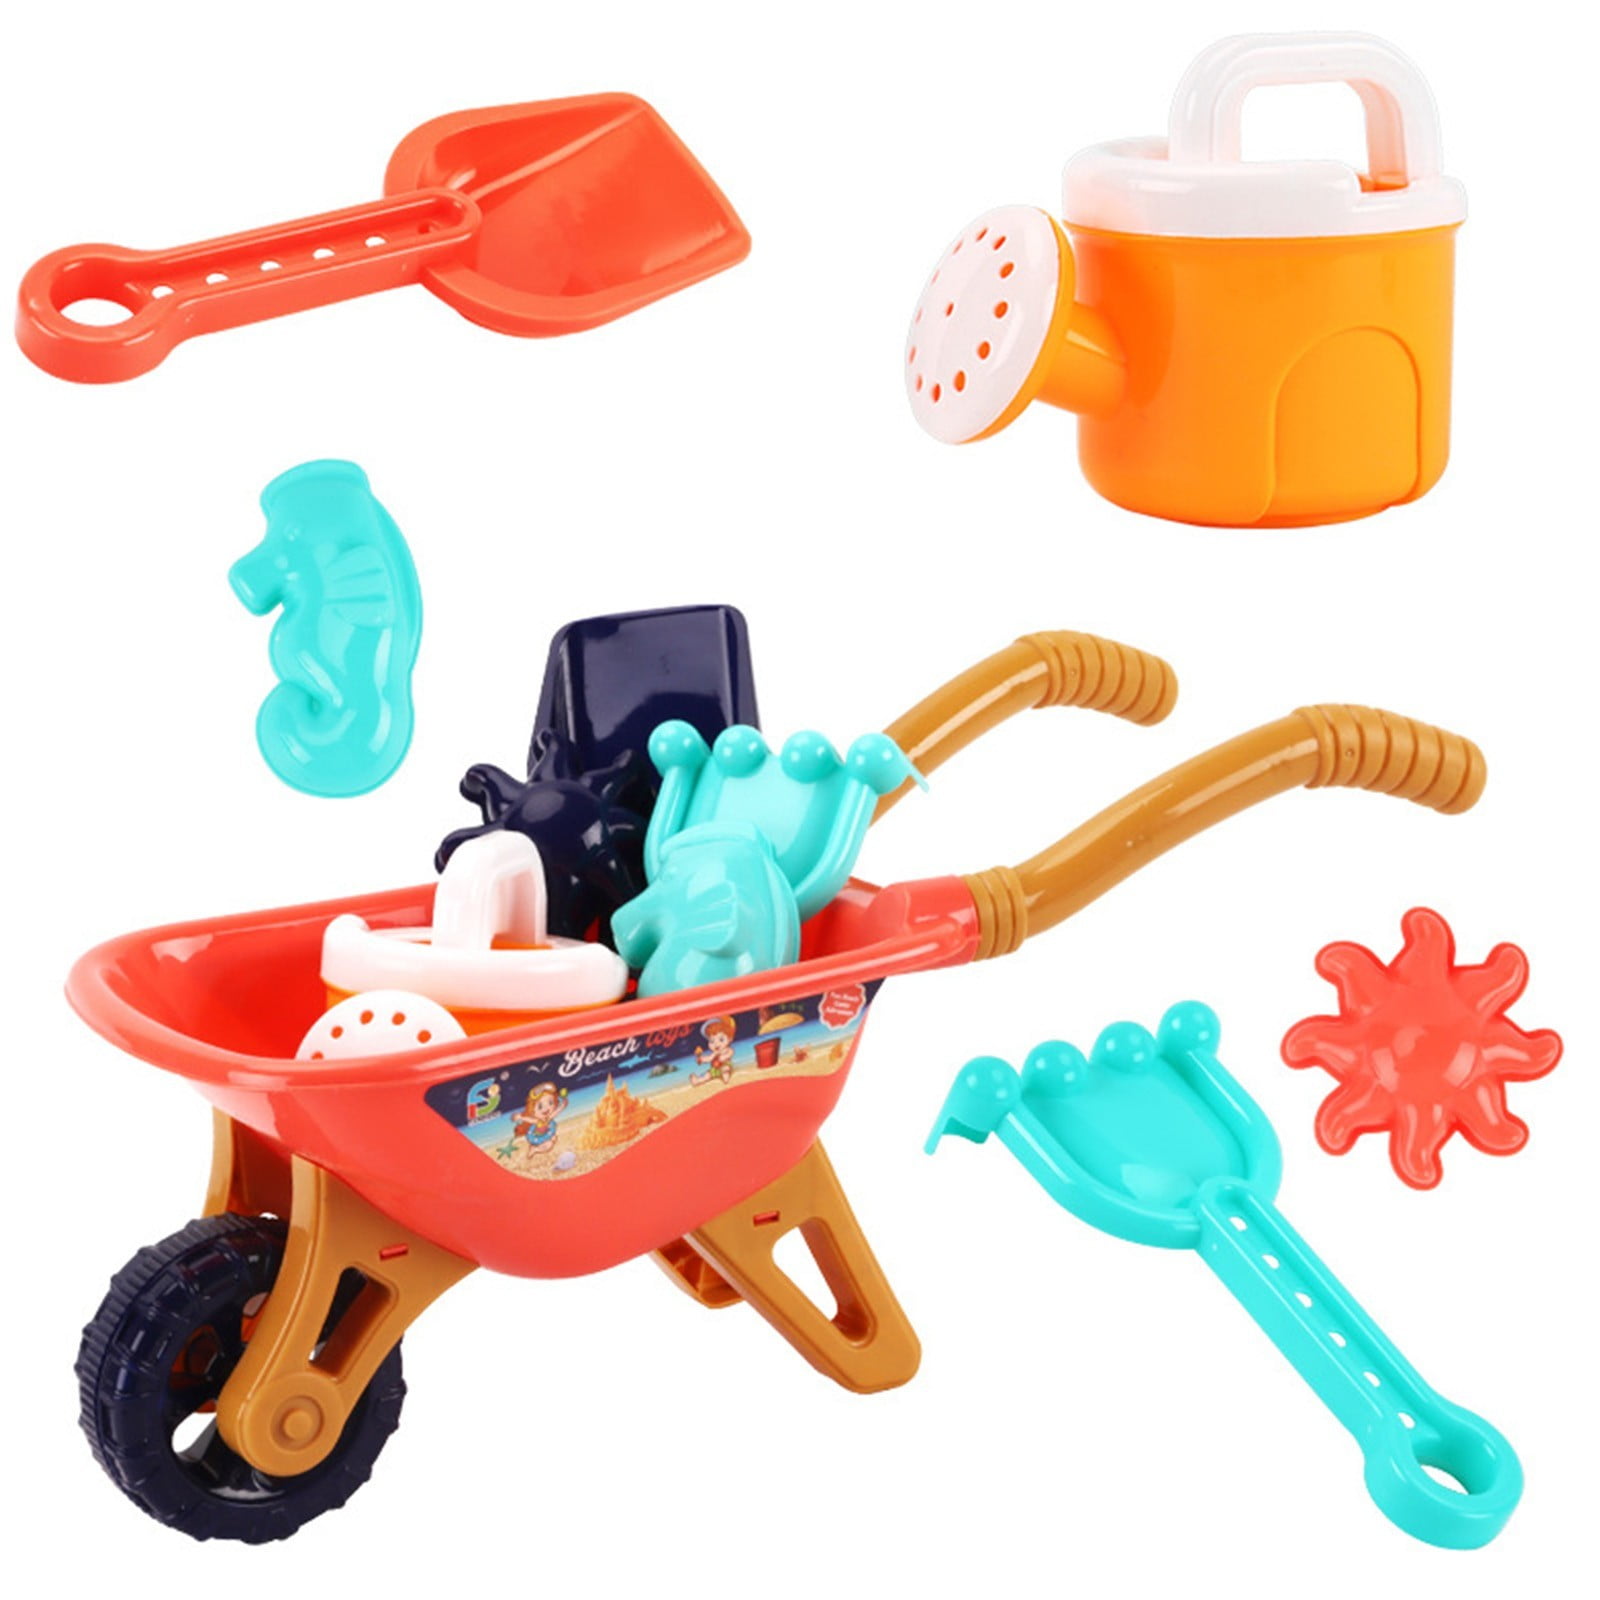 HomestreetUK Sand Beach Truck 6 Piece Set in Pink or Blue with Dump Truck including Watering Can Digging Tools and Sand Moulds for Seaside or Sandpit Play PINK